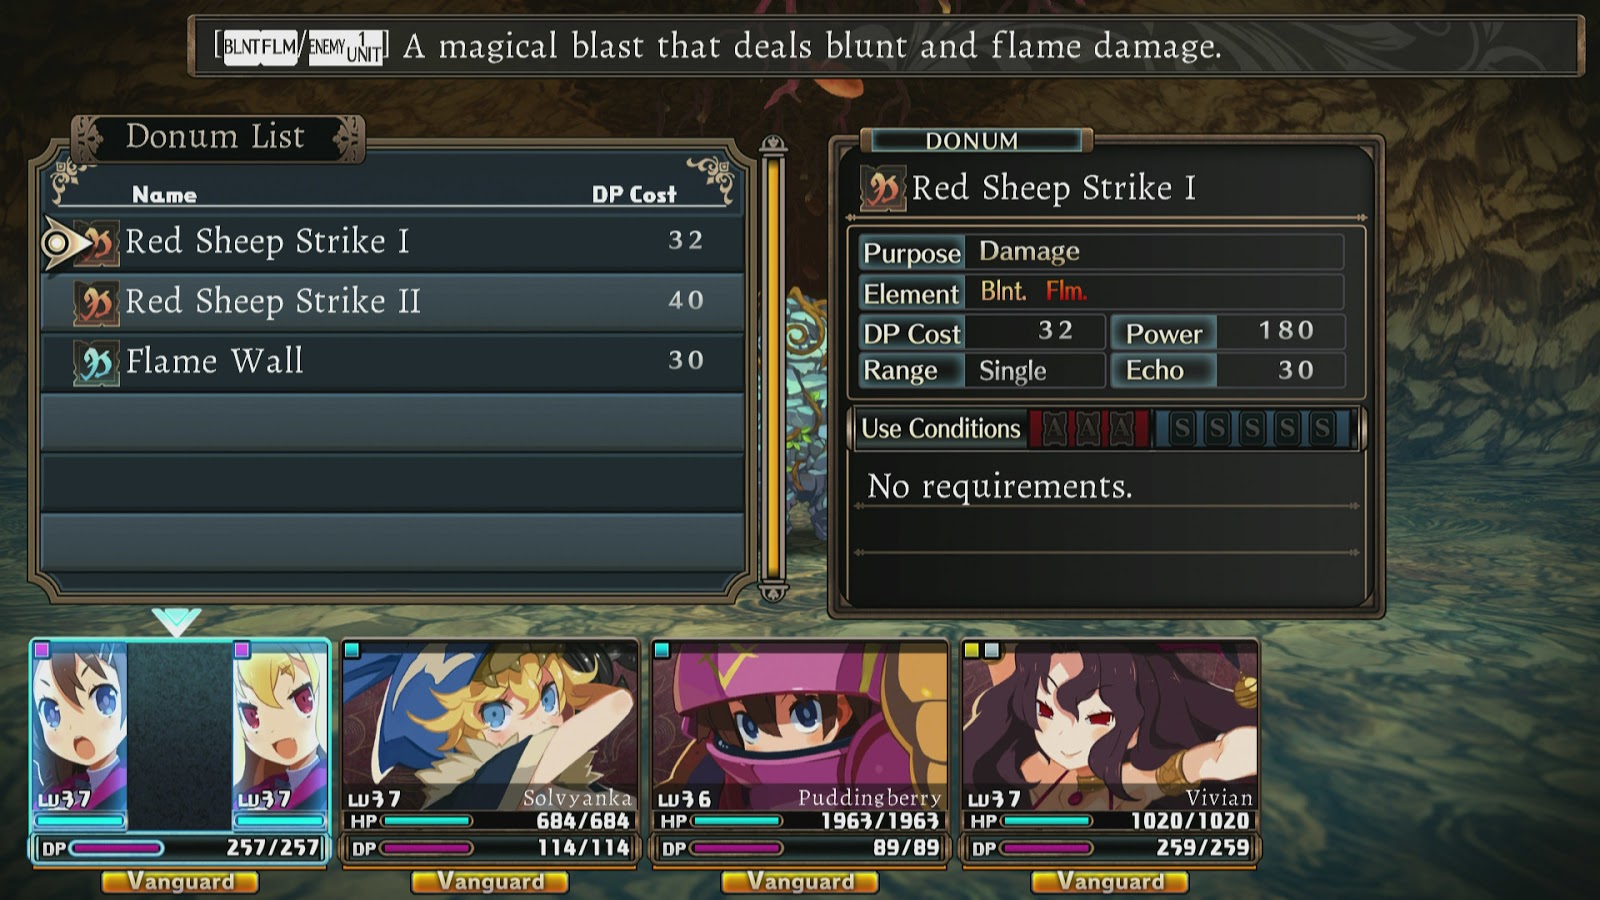 Labyrinth of Refrain: Coven of Dusk Free Download